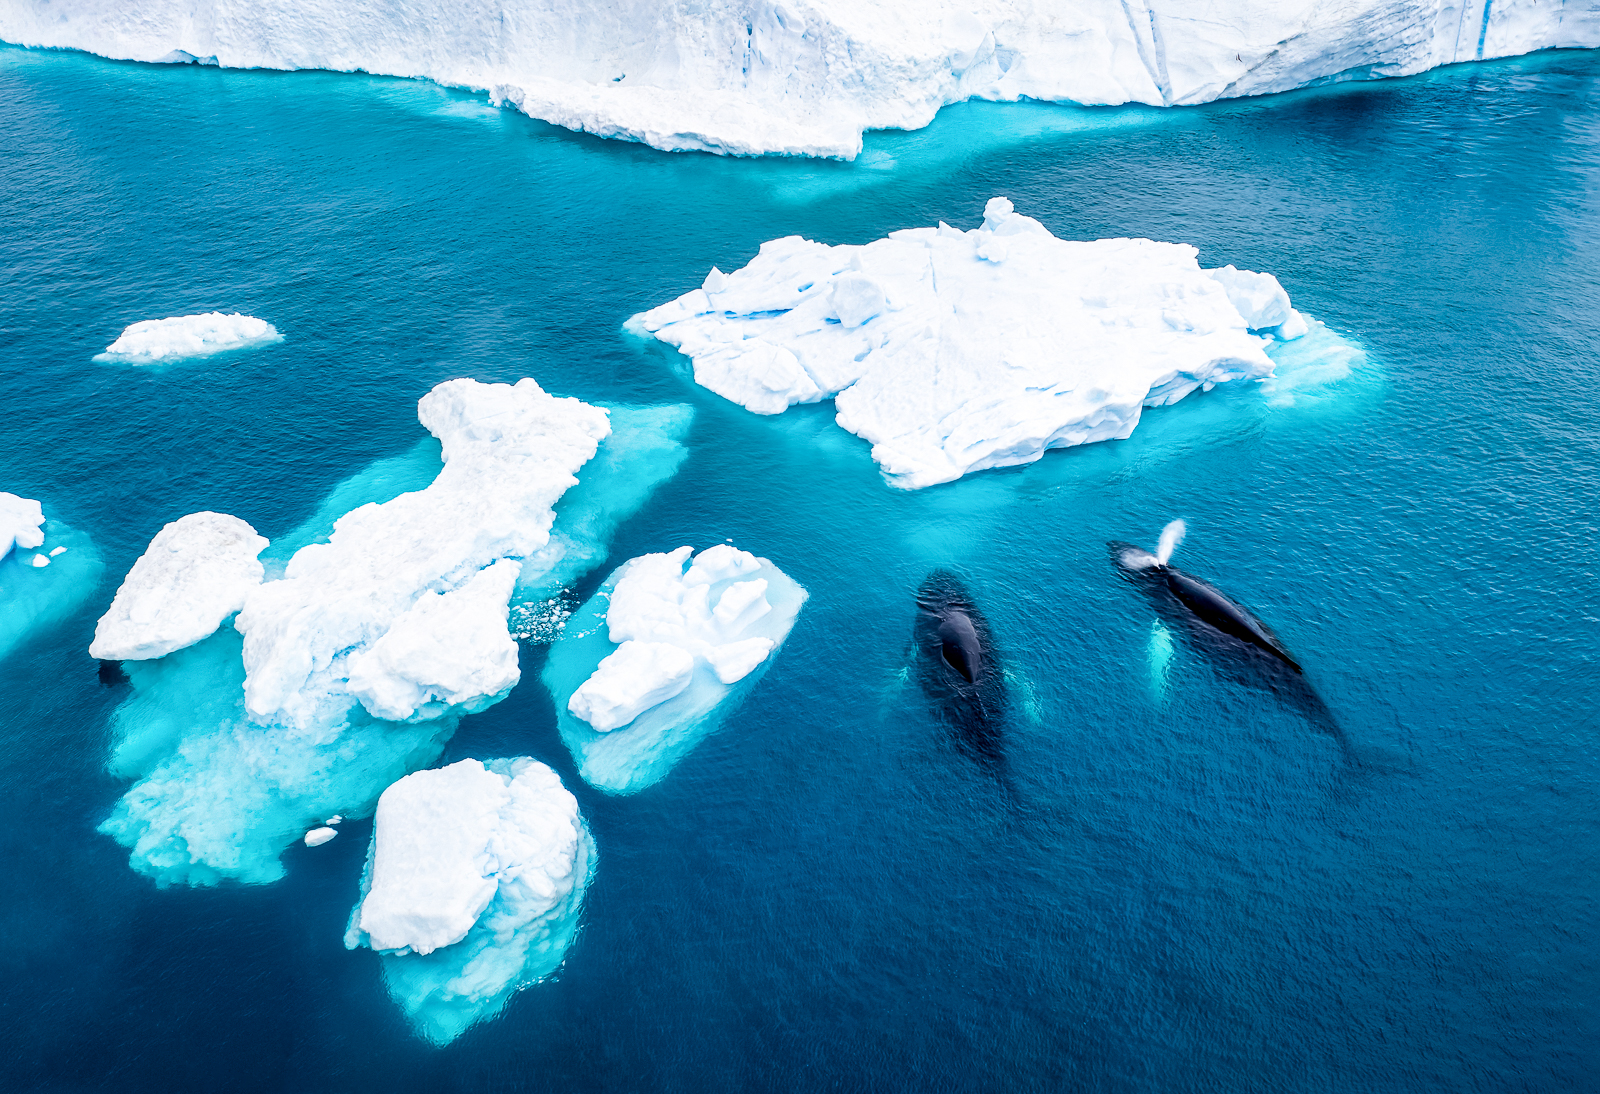 Two humpback whales swimming around icebergs in the Arctic